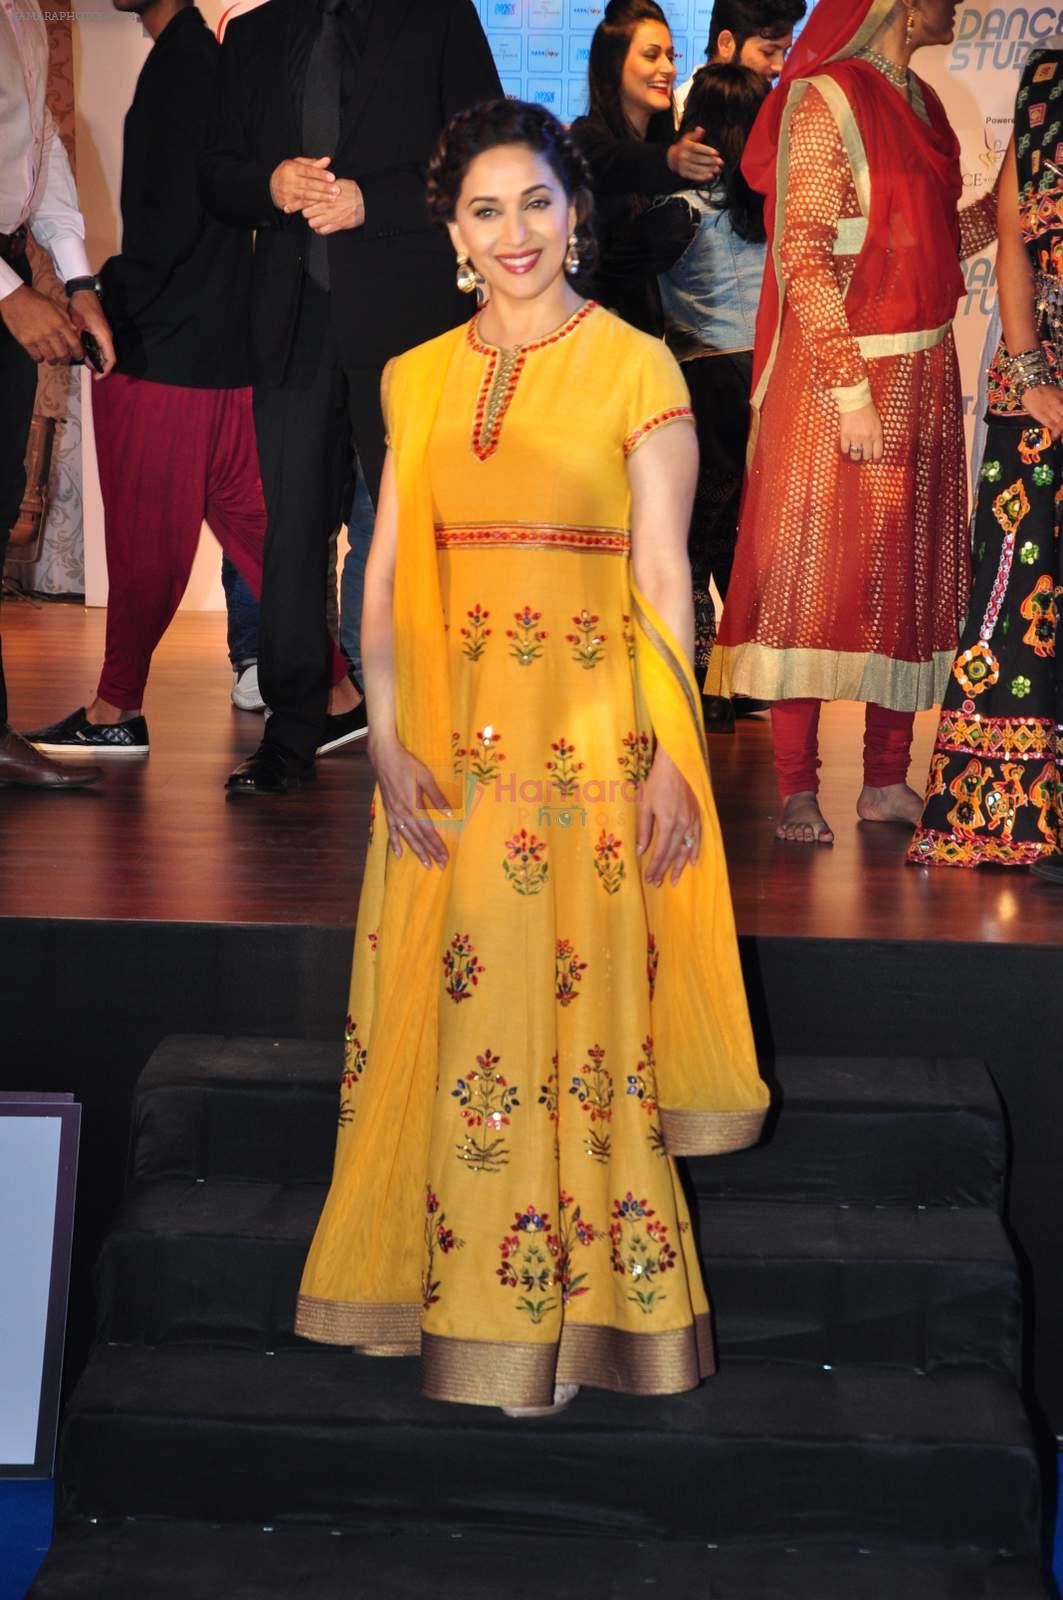 Madhuri Dixit launches dance channel on tata sky on 10th Dec 2015